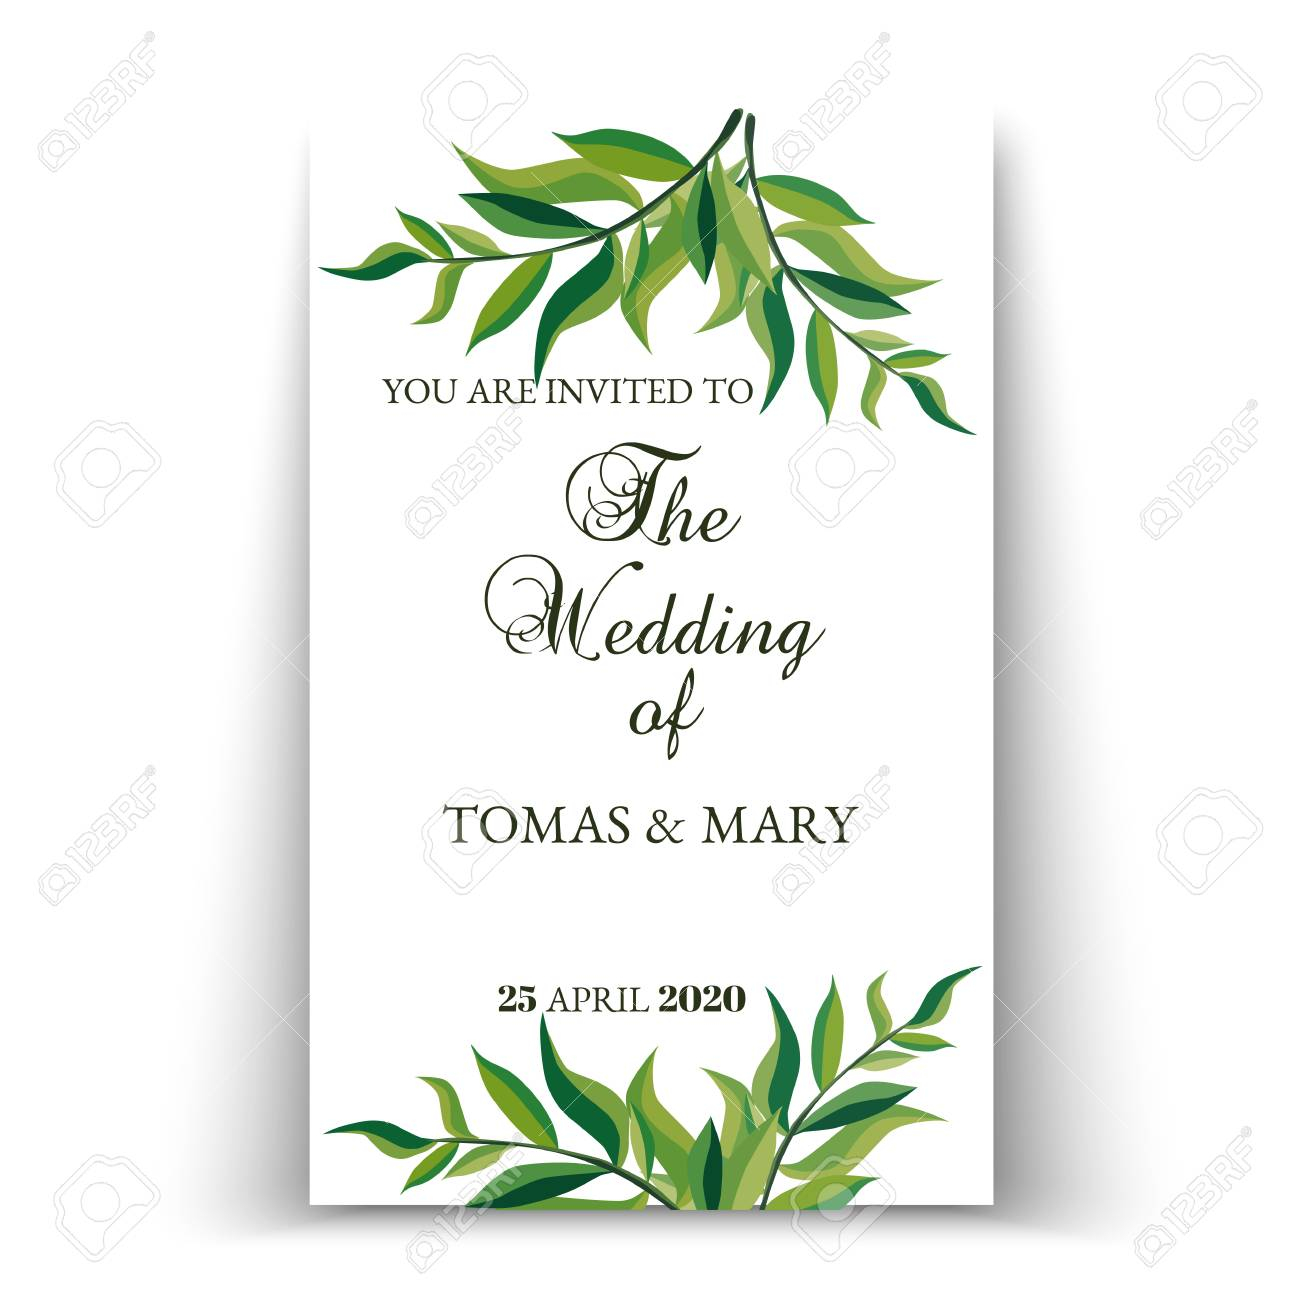 Greenery Wedding Invitation Template Printable Wedding Invites intended for dimensions 1300 X 1300